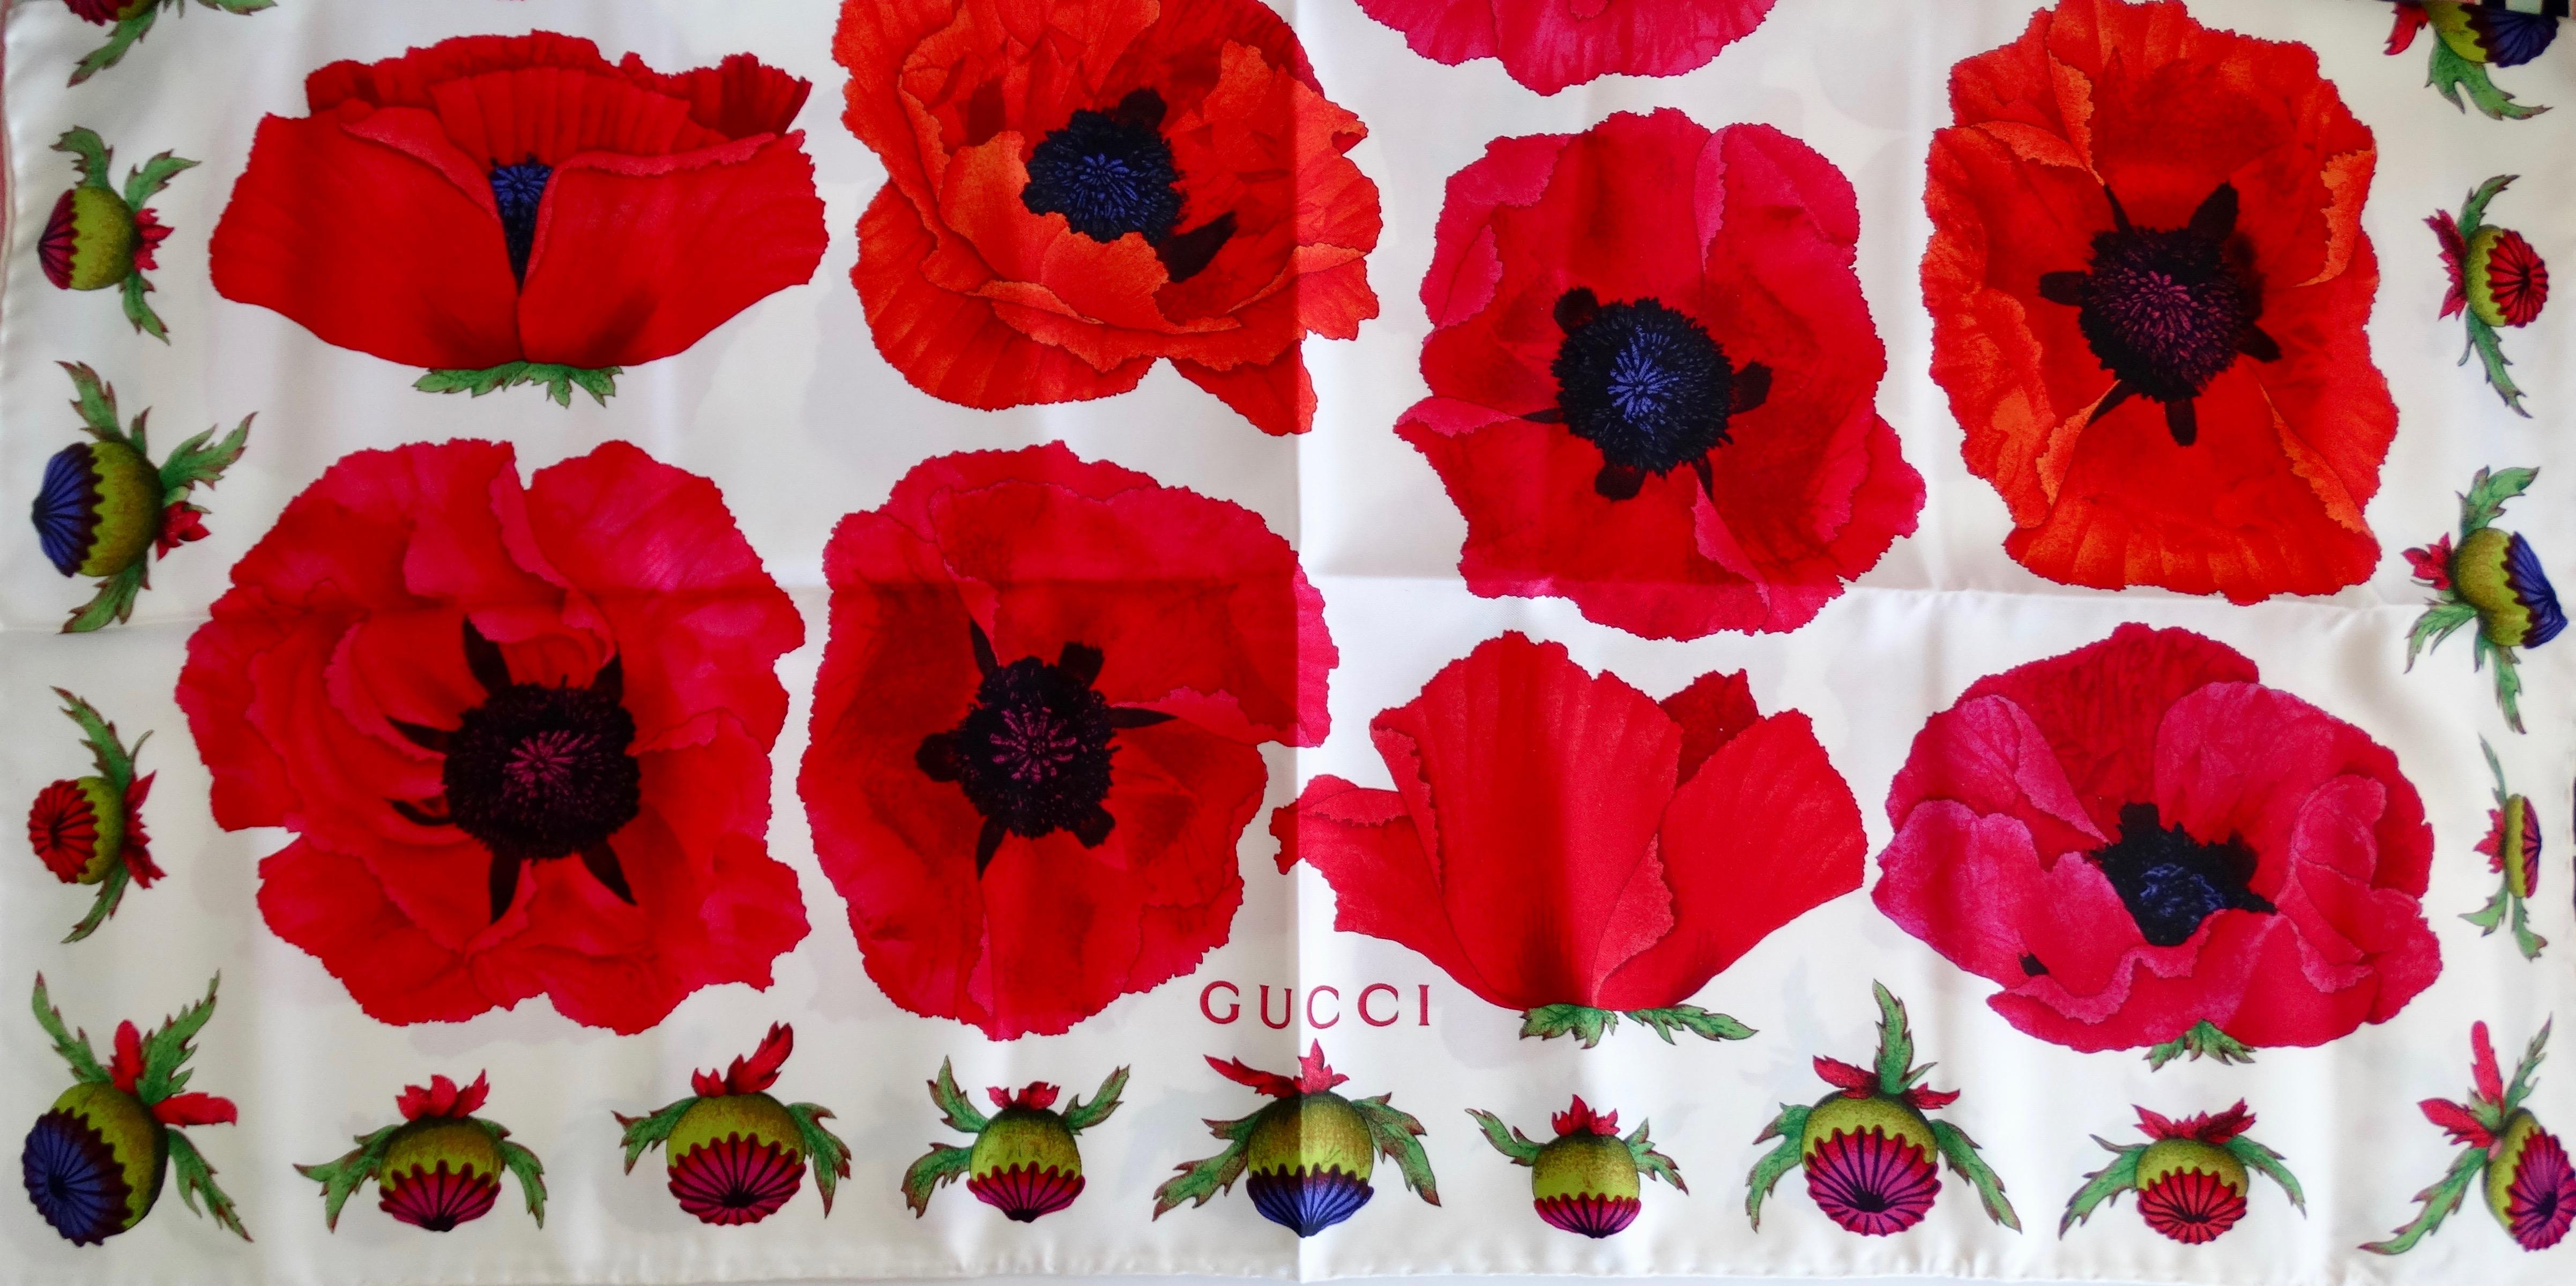 Everyone needs a vintage Gucci scarf in their collection! Circa 1980s, this Gucci silk scarf features a colorful poppy motif against a white background. Vibrant poppy buds line the trim and Gucci is featured in red lettering at the center bottom.